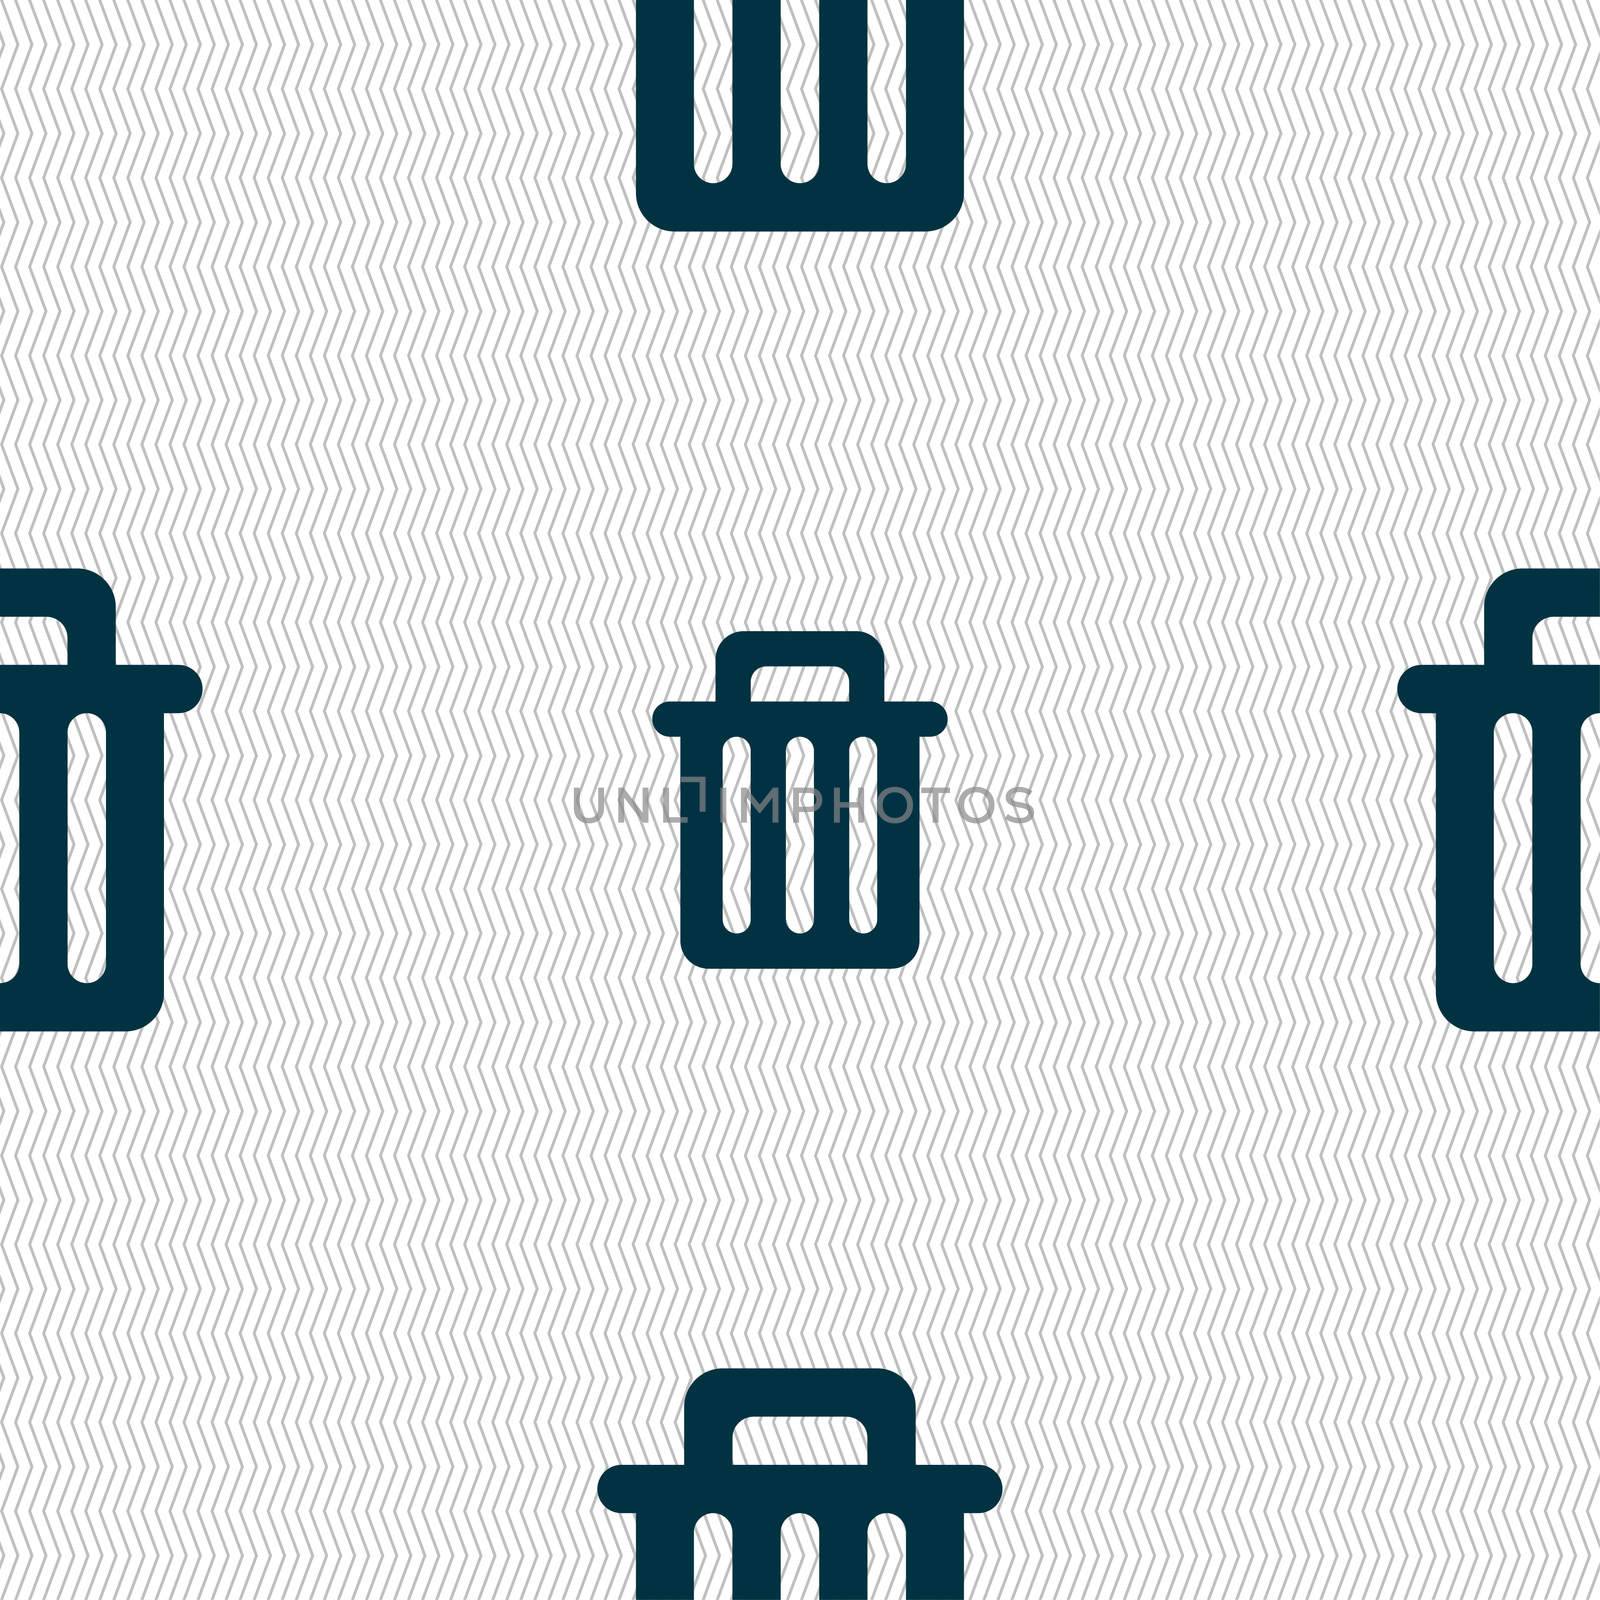 Recycle bin icon sign. Seamless pattern with geometric texture. illustration